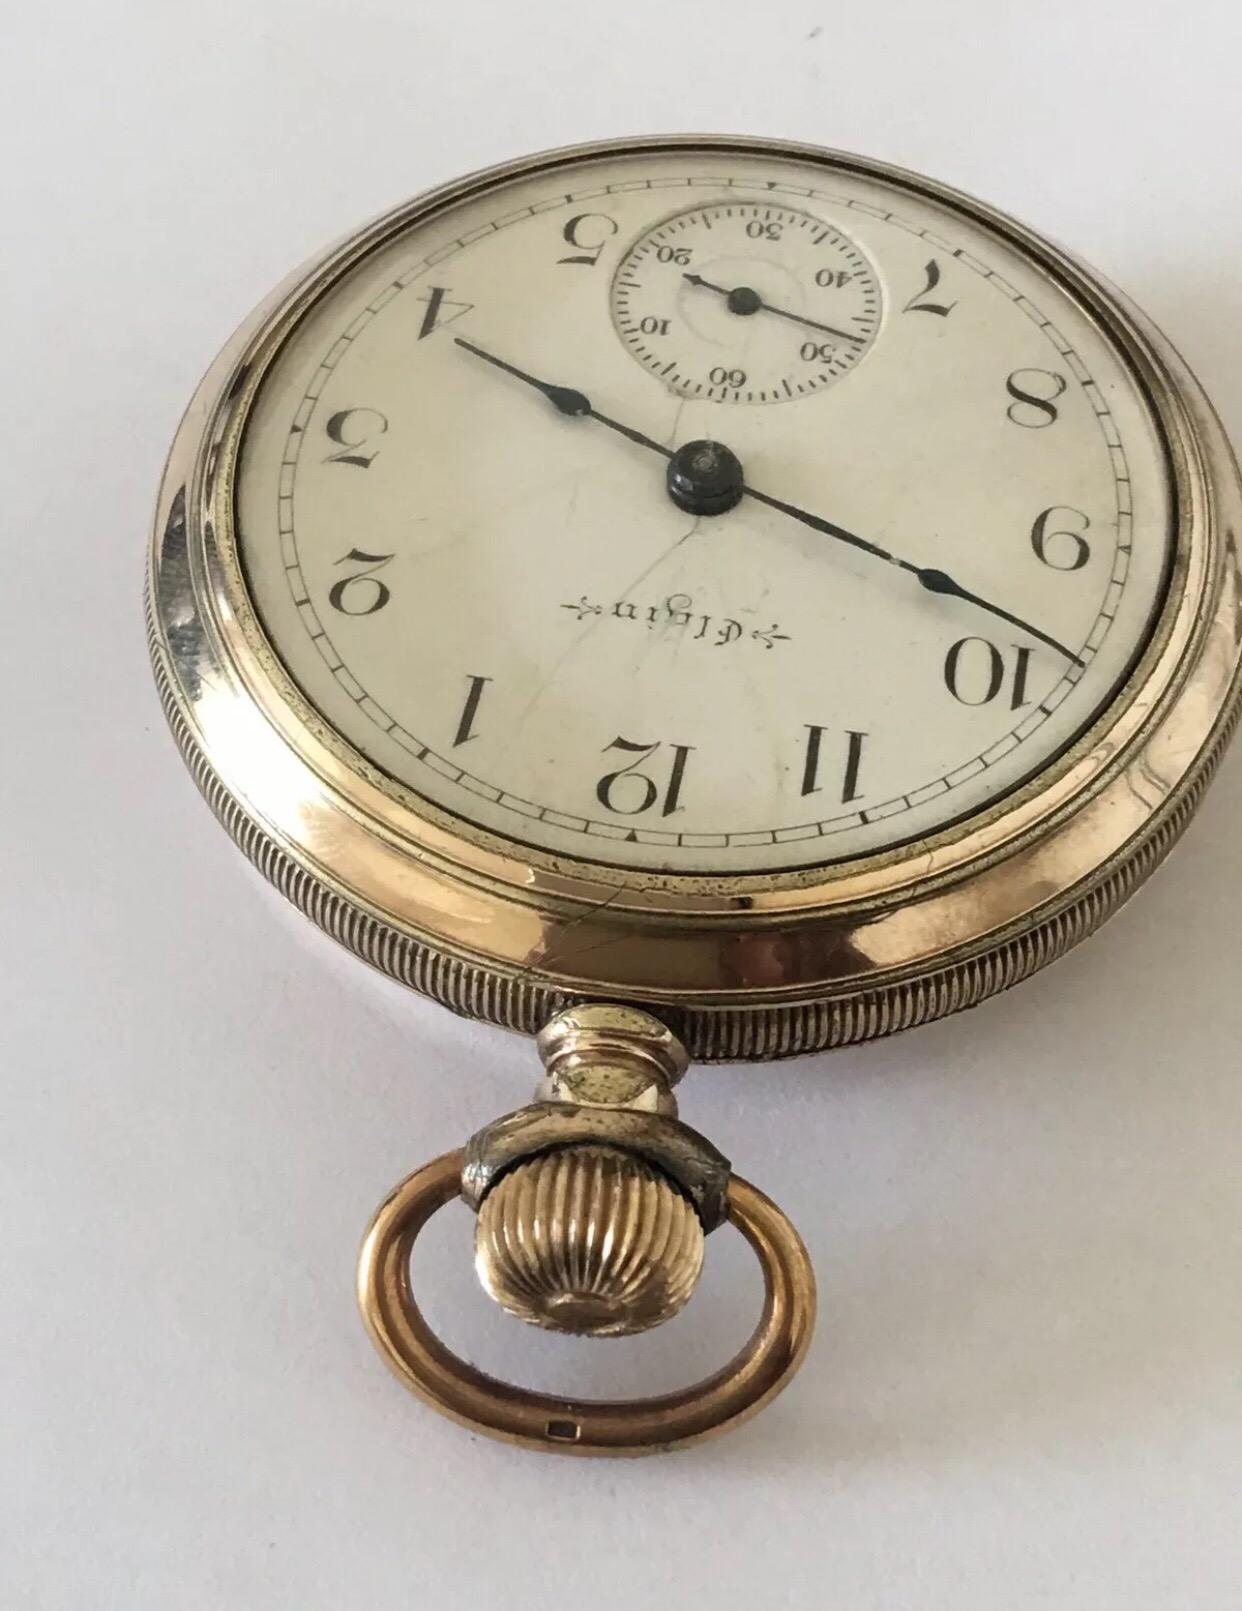 Antique Screw Back Gold-Plated Pocket Watch Signed Elgin Nat’l Watch Co. USA For Sale 3